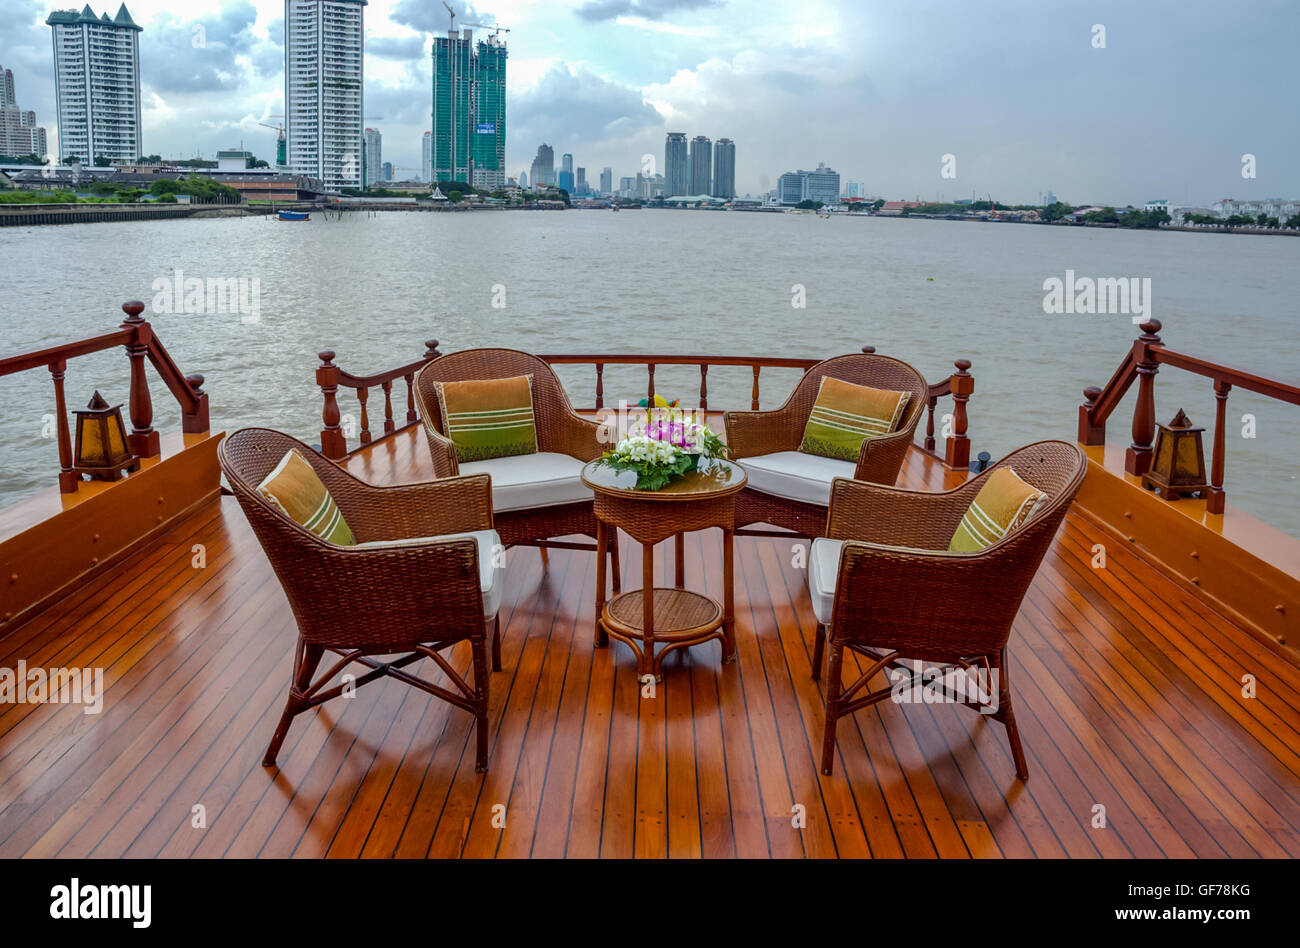 Rattan furniture, table, chairs, outdoor cushions and pillows on river boat Stock Photo